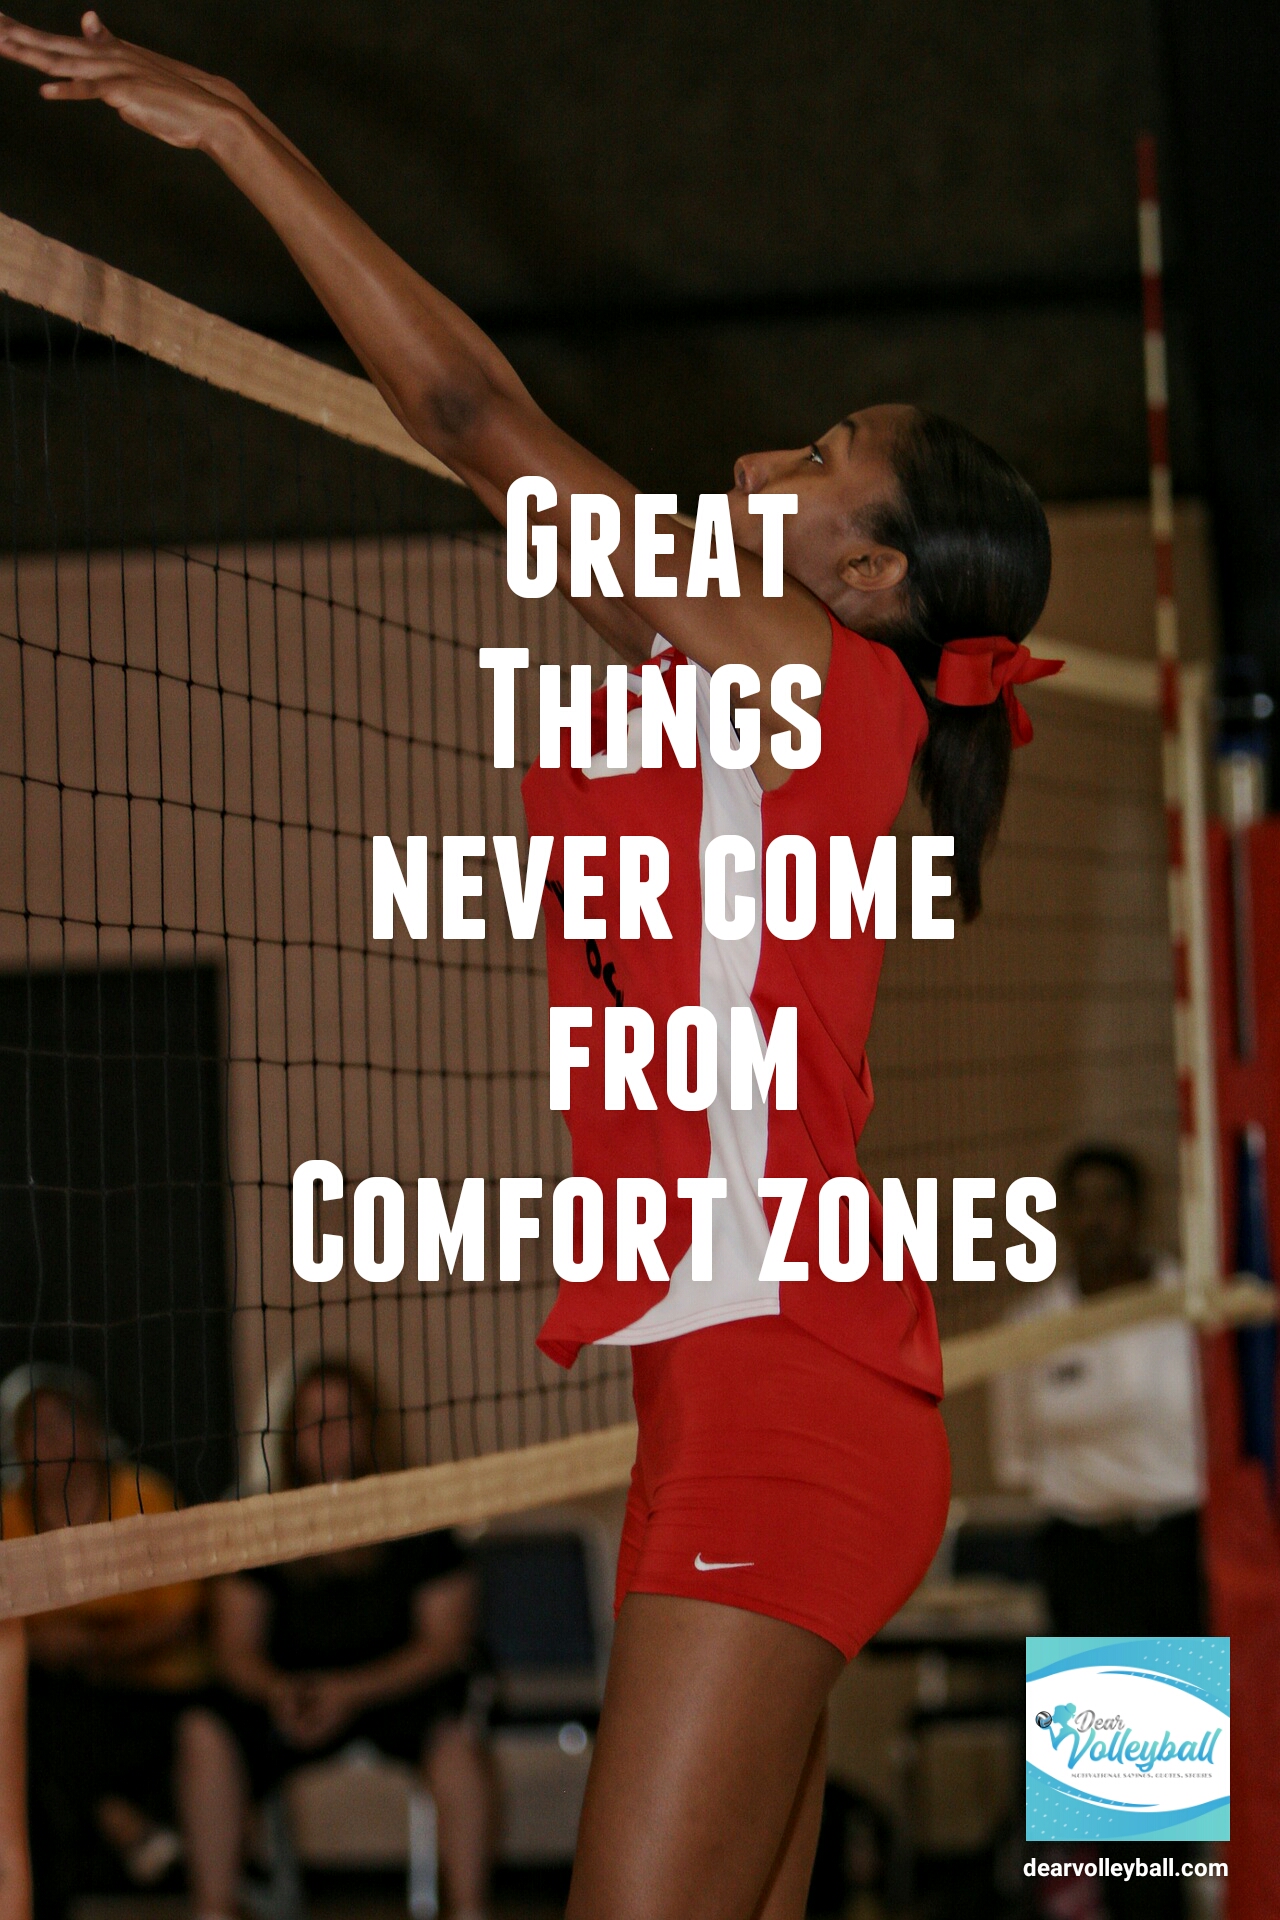 Great things never come from comfort zones and other motivational volleyball quotes on DearVolleyball.com